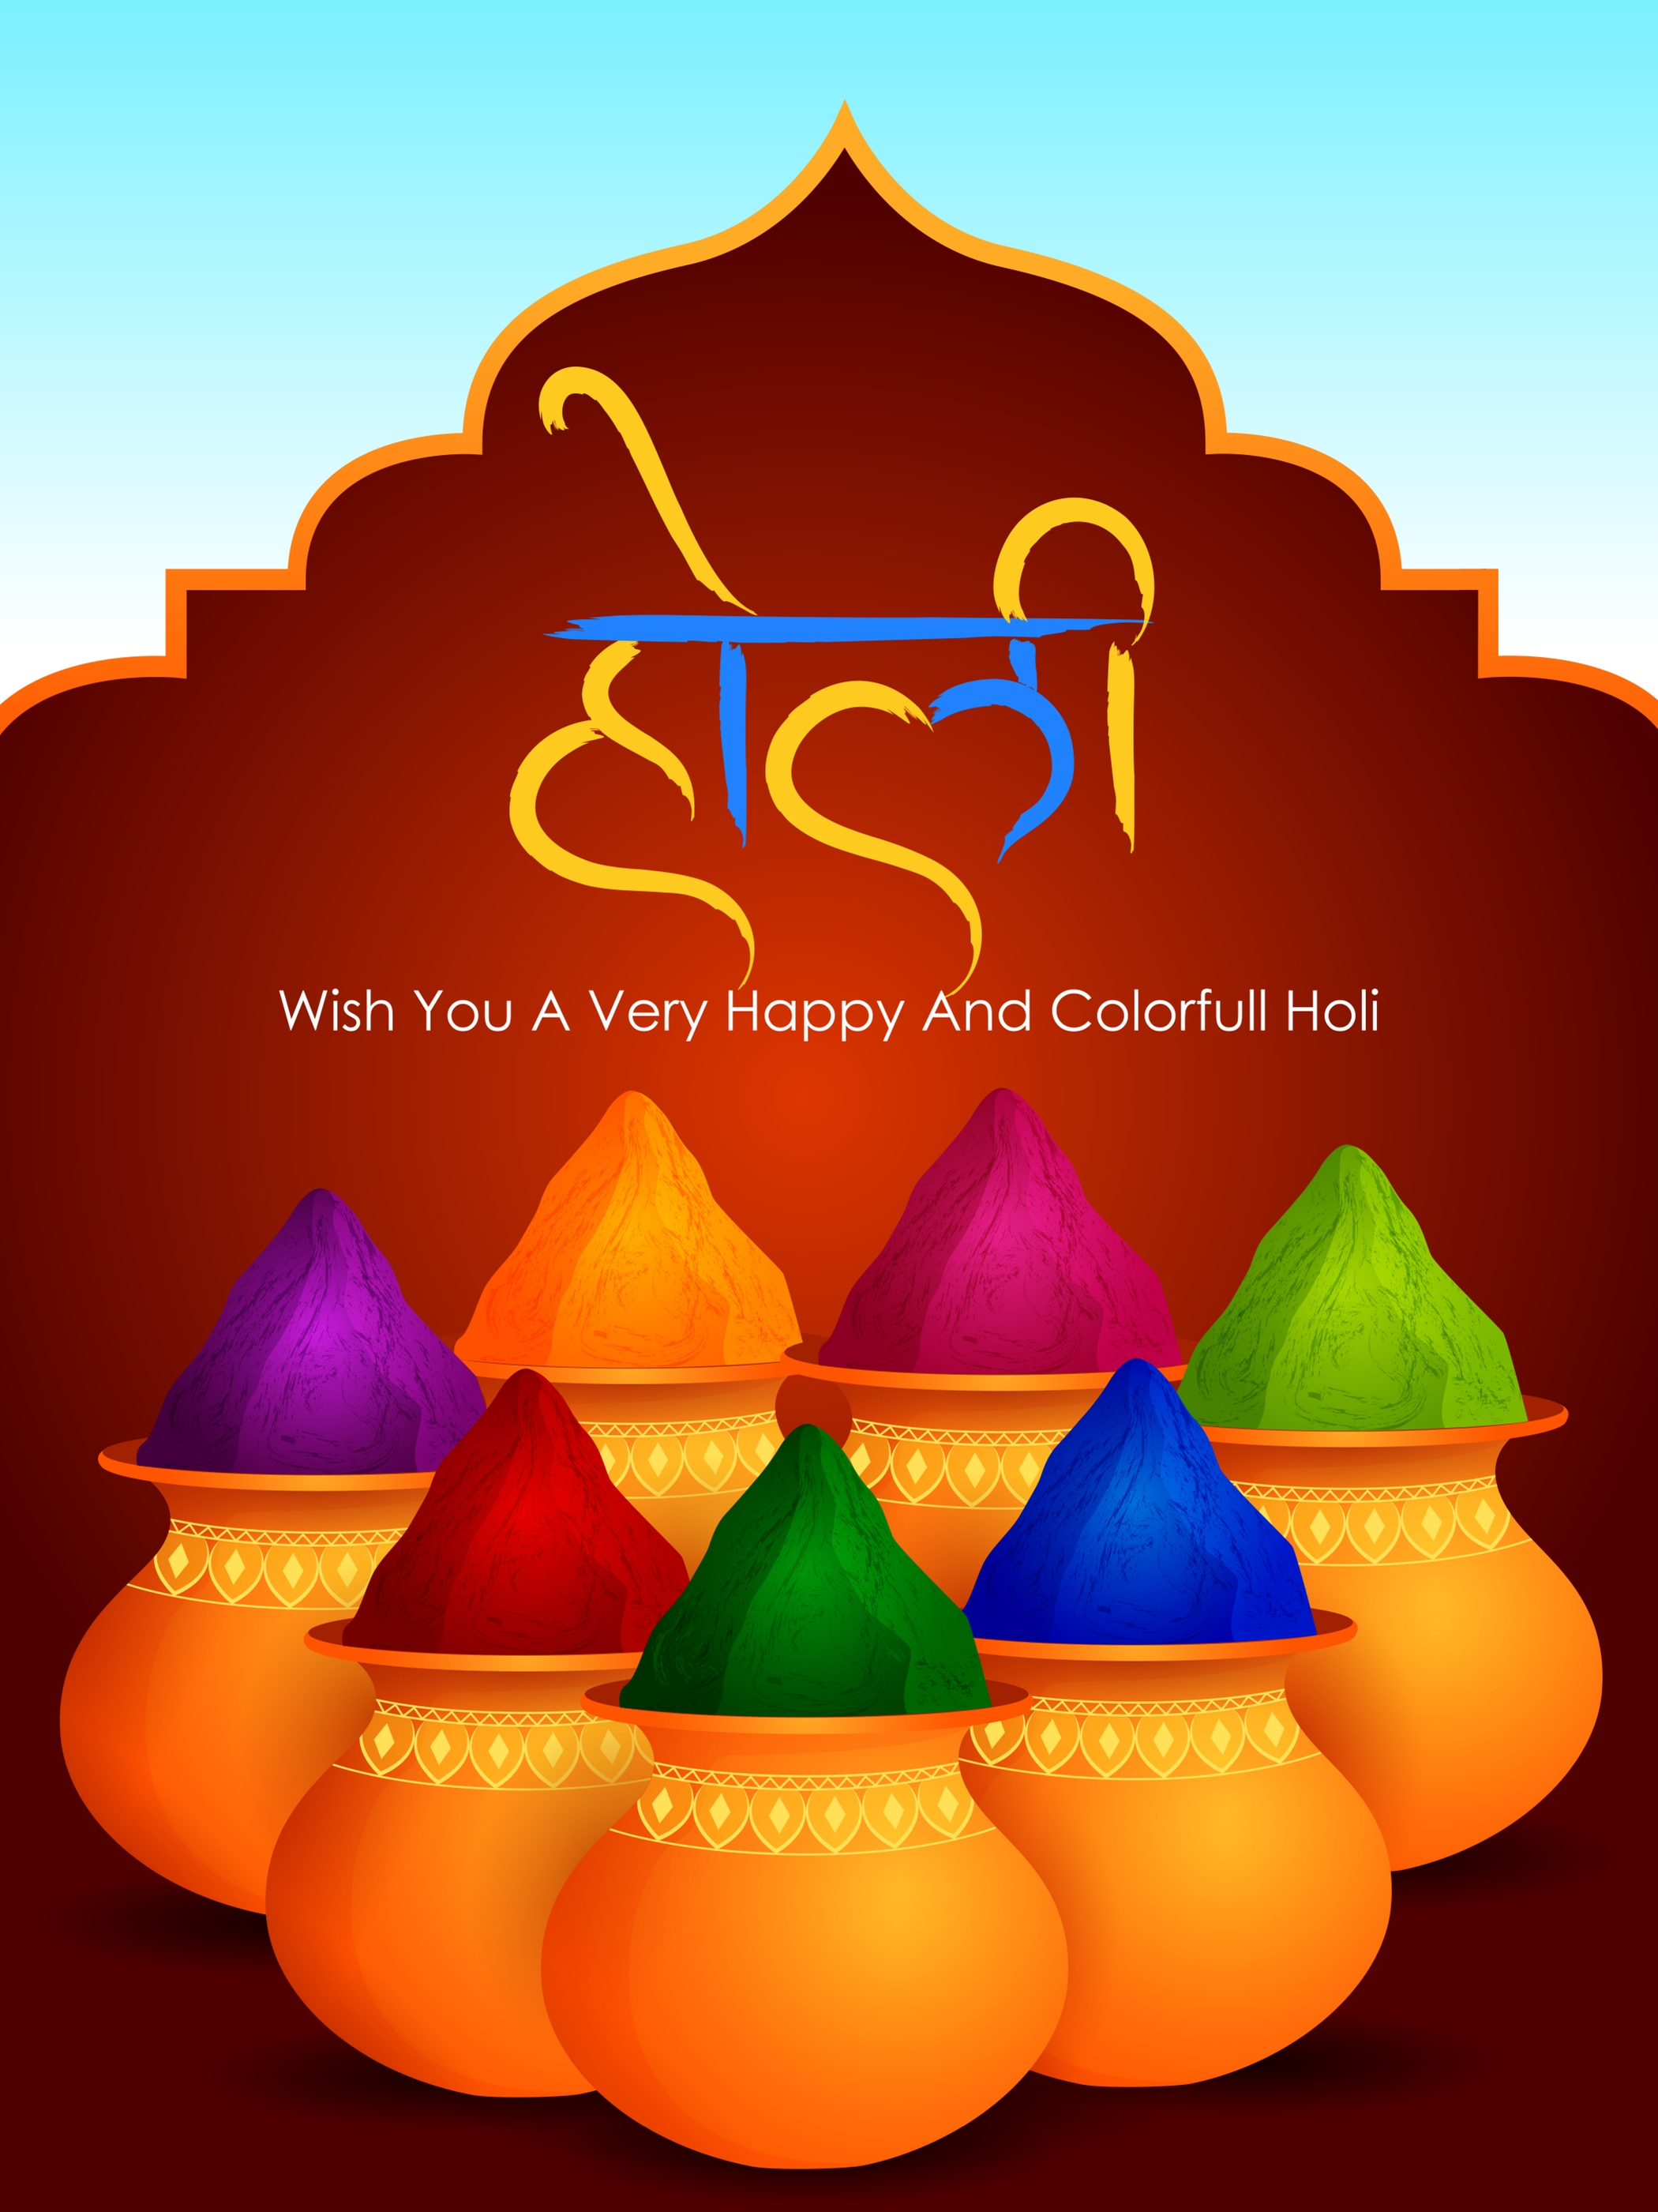 Happy Holi 2022: Wishes, Image, Status, Quotes, Messages and WhatsApp Greetings to Share on Festival of Colours